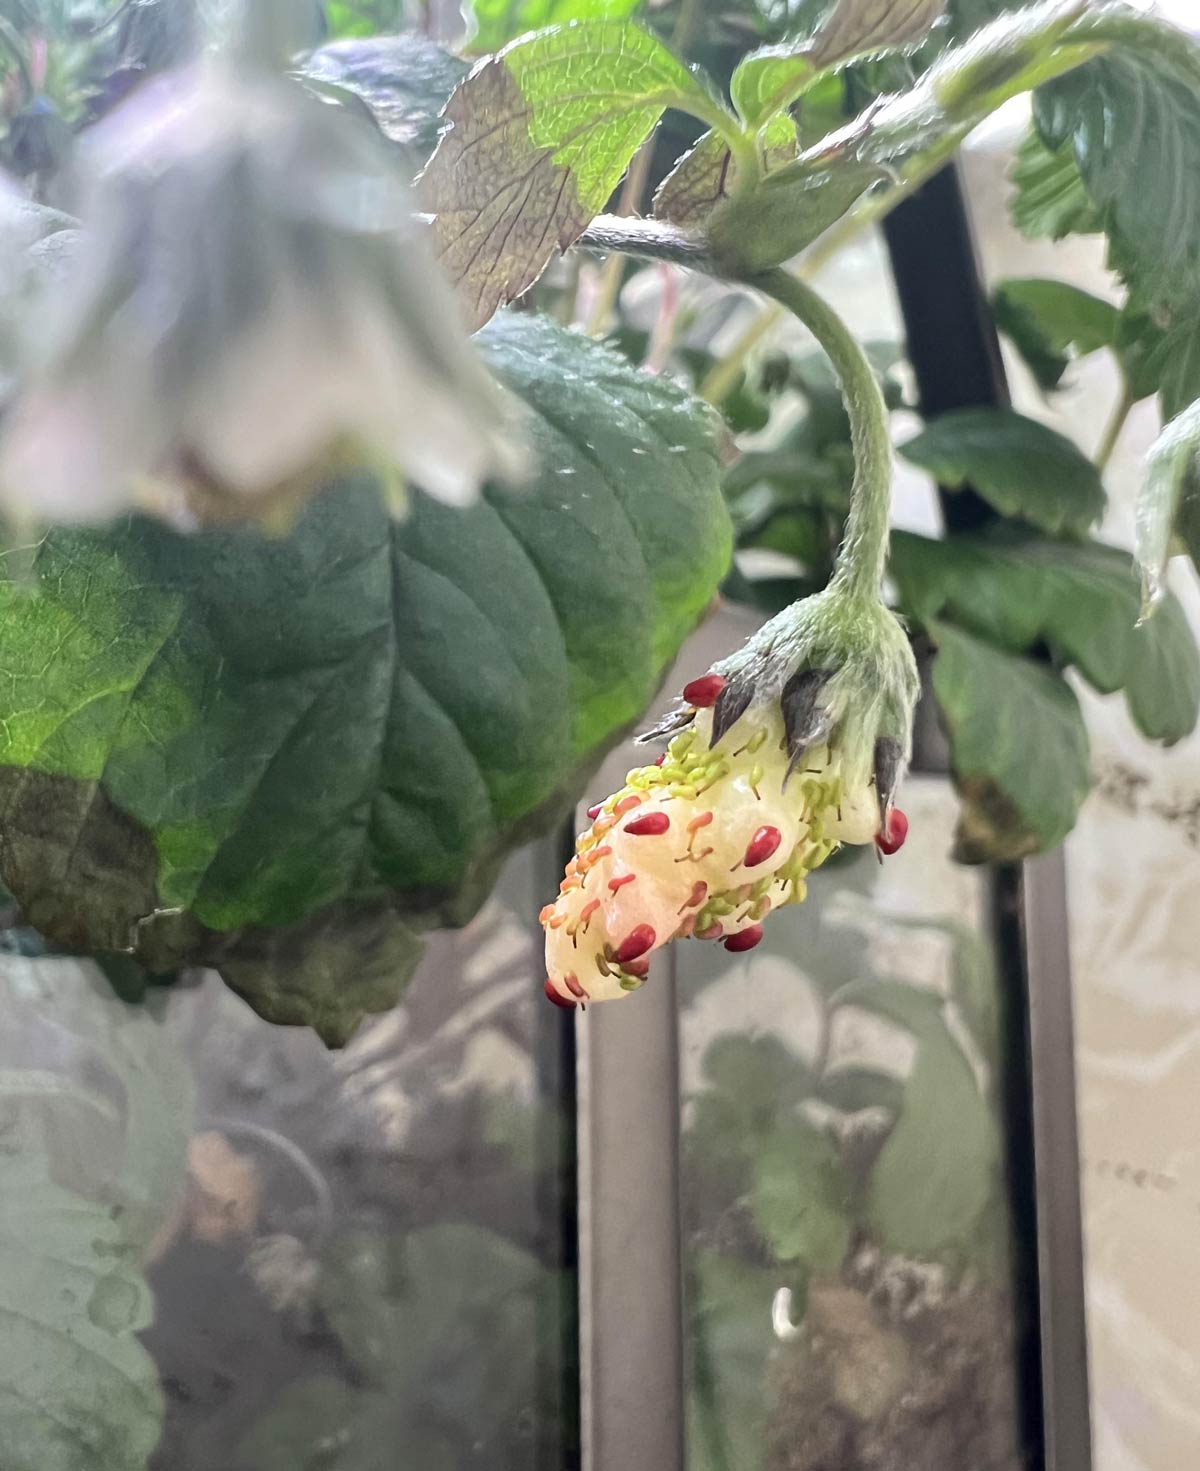 I attempted to hand pollinate my Indoor strawberry plant but I didn’t do a very good job